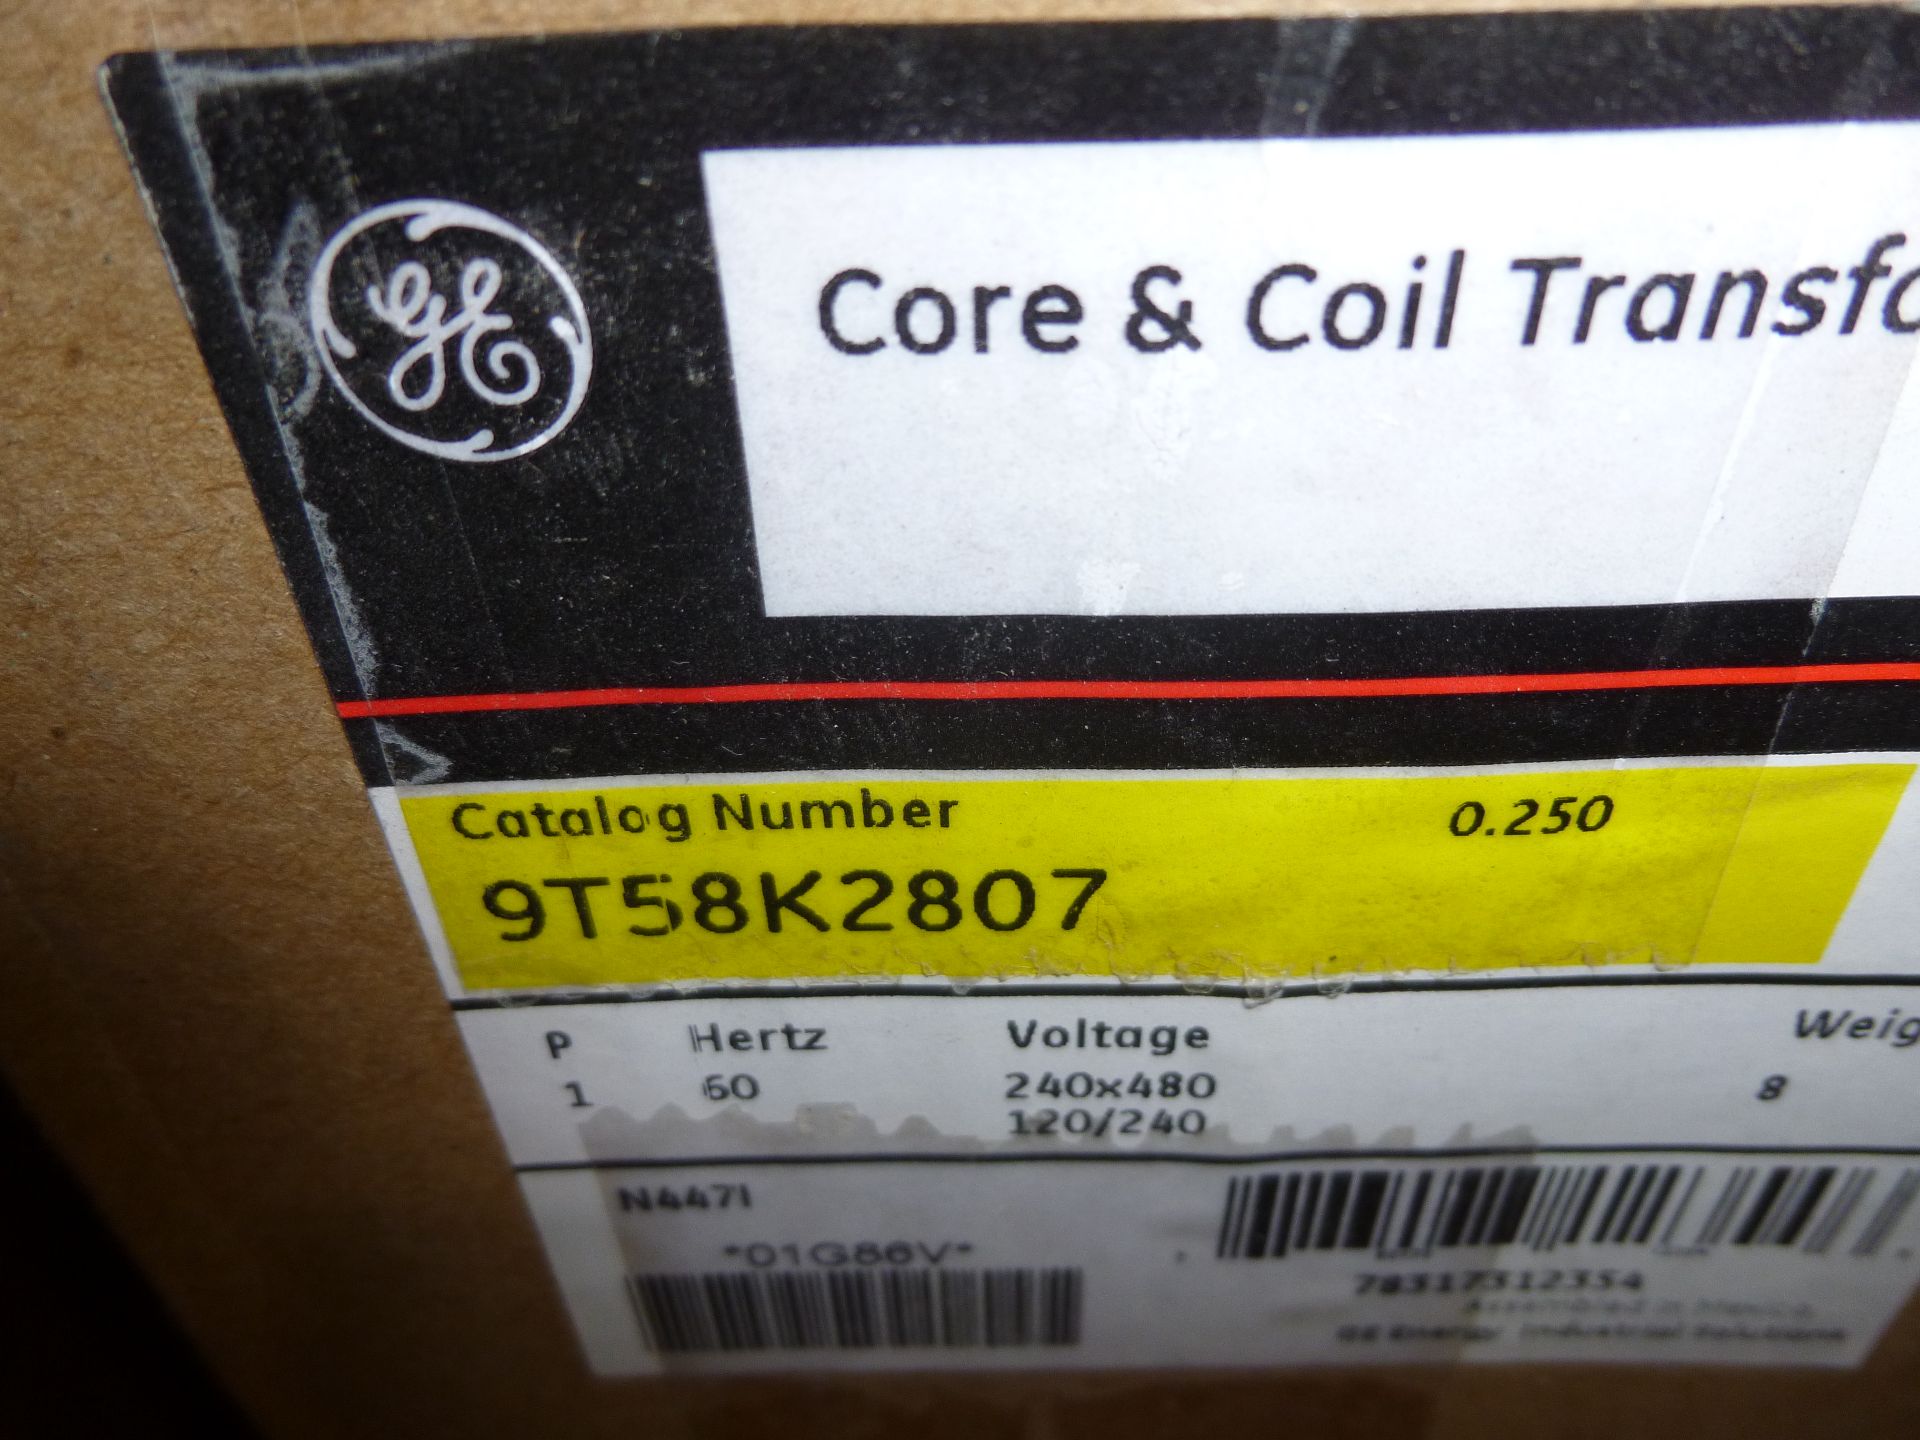 GE Core and Coil Transformer Catalog number 9T58K2807 new in box, as always with Brolyn LLC - Image 2 of 2